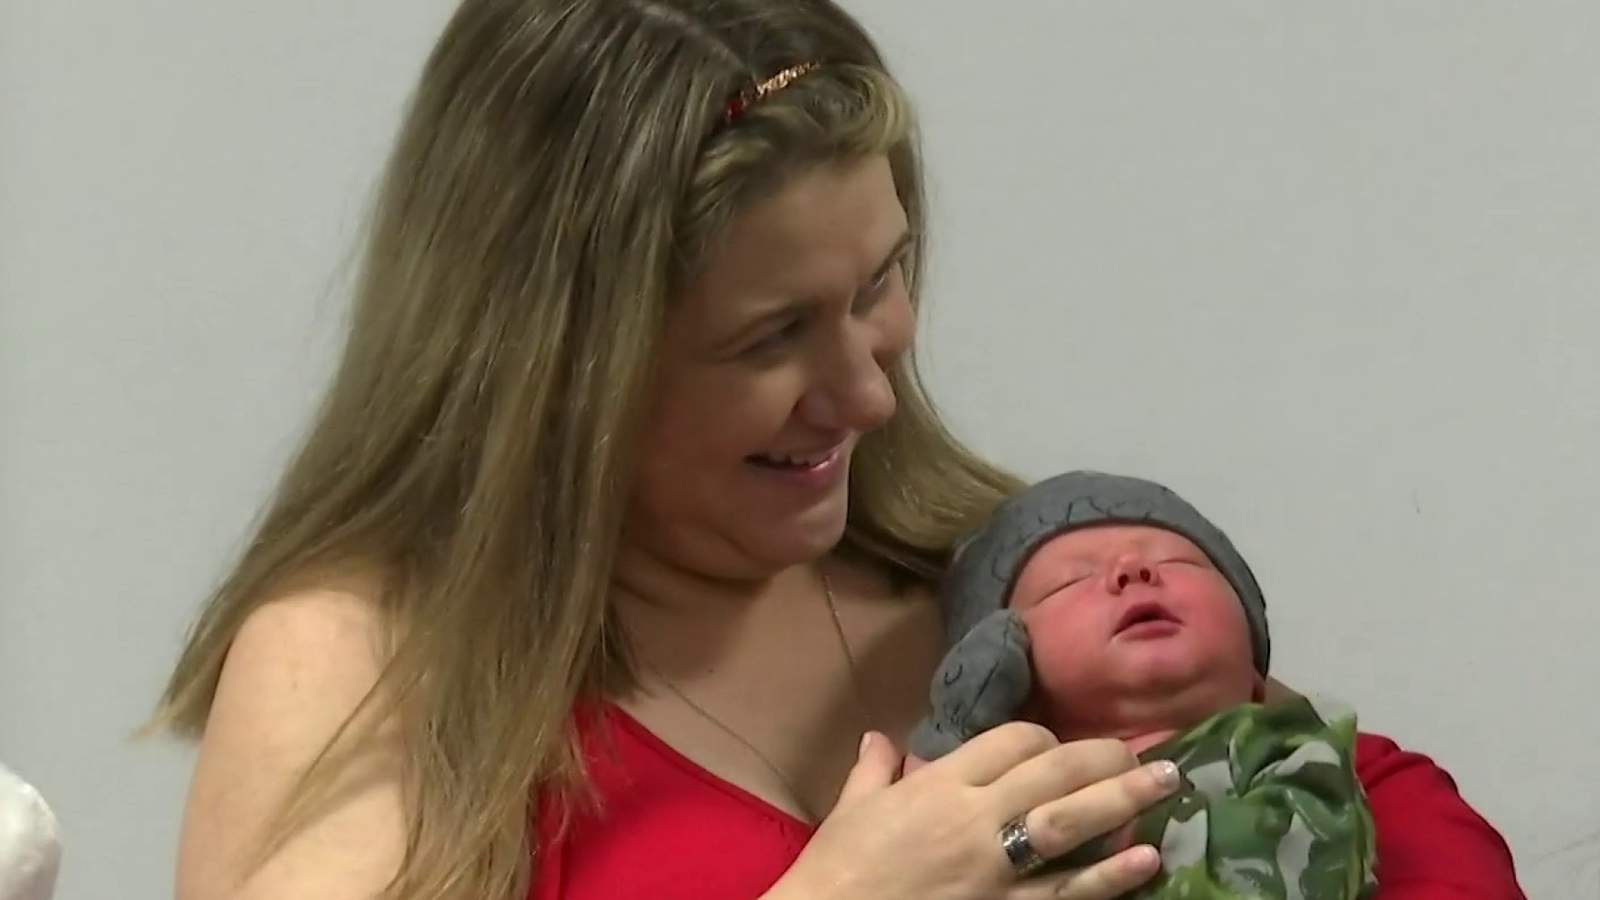 Baby delivered at gas station reunites with first responders